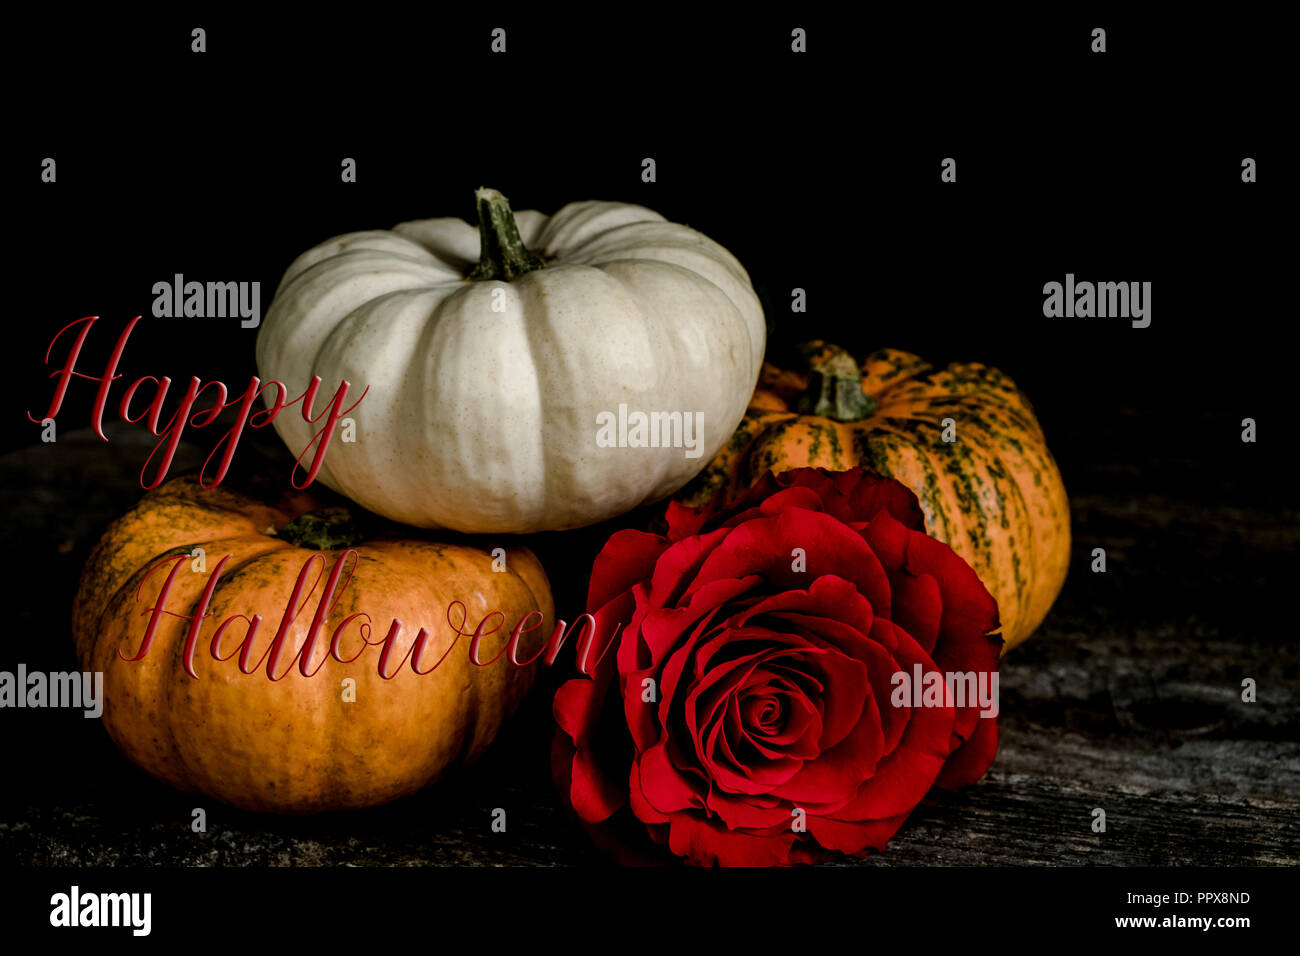 Halloween banner with pumpkins and a red rose, and quote 'Happy Halloween'. Great for social media and blog accounts. Stock Photo